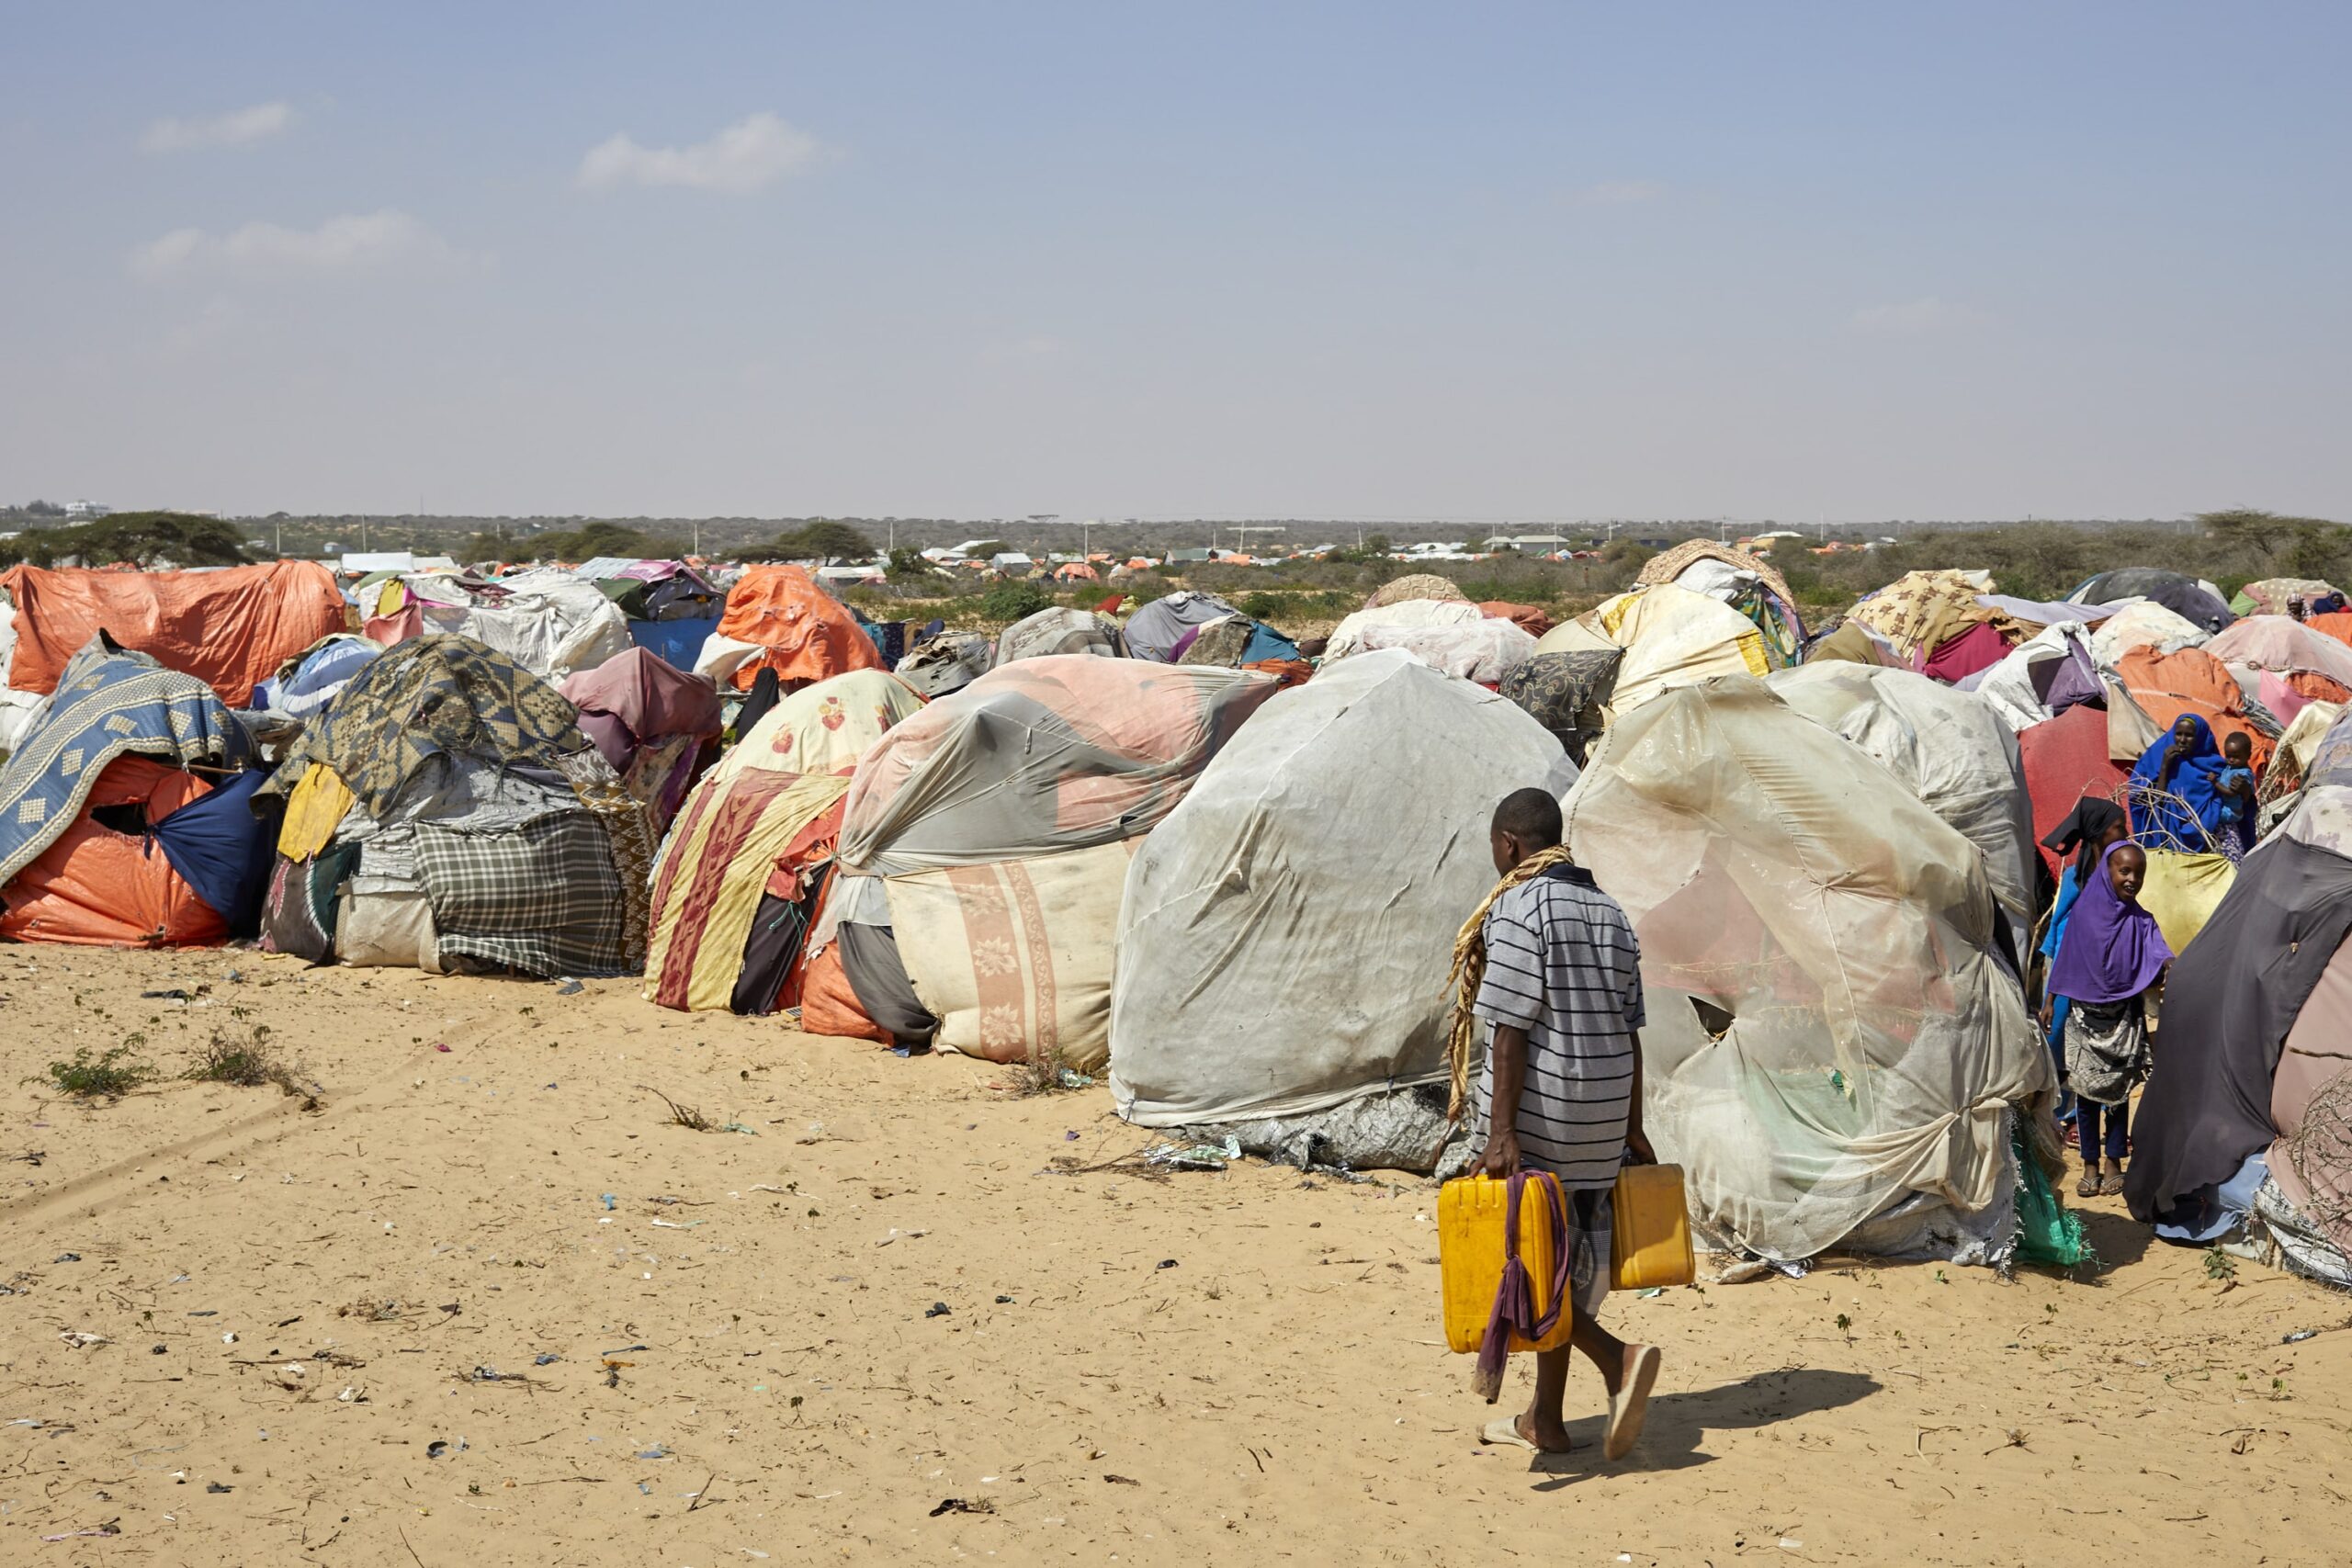 A refugee carrying two yellow water containers walks in front of a refugee camp in Somalia with tents surrounded by sand and shrubs.